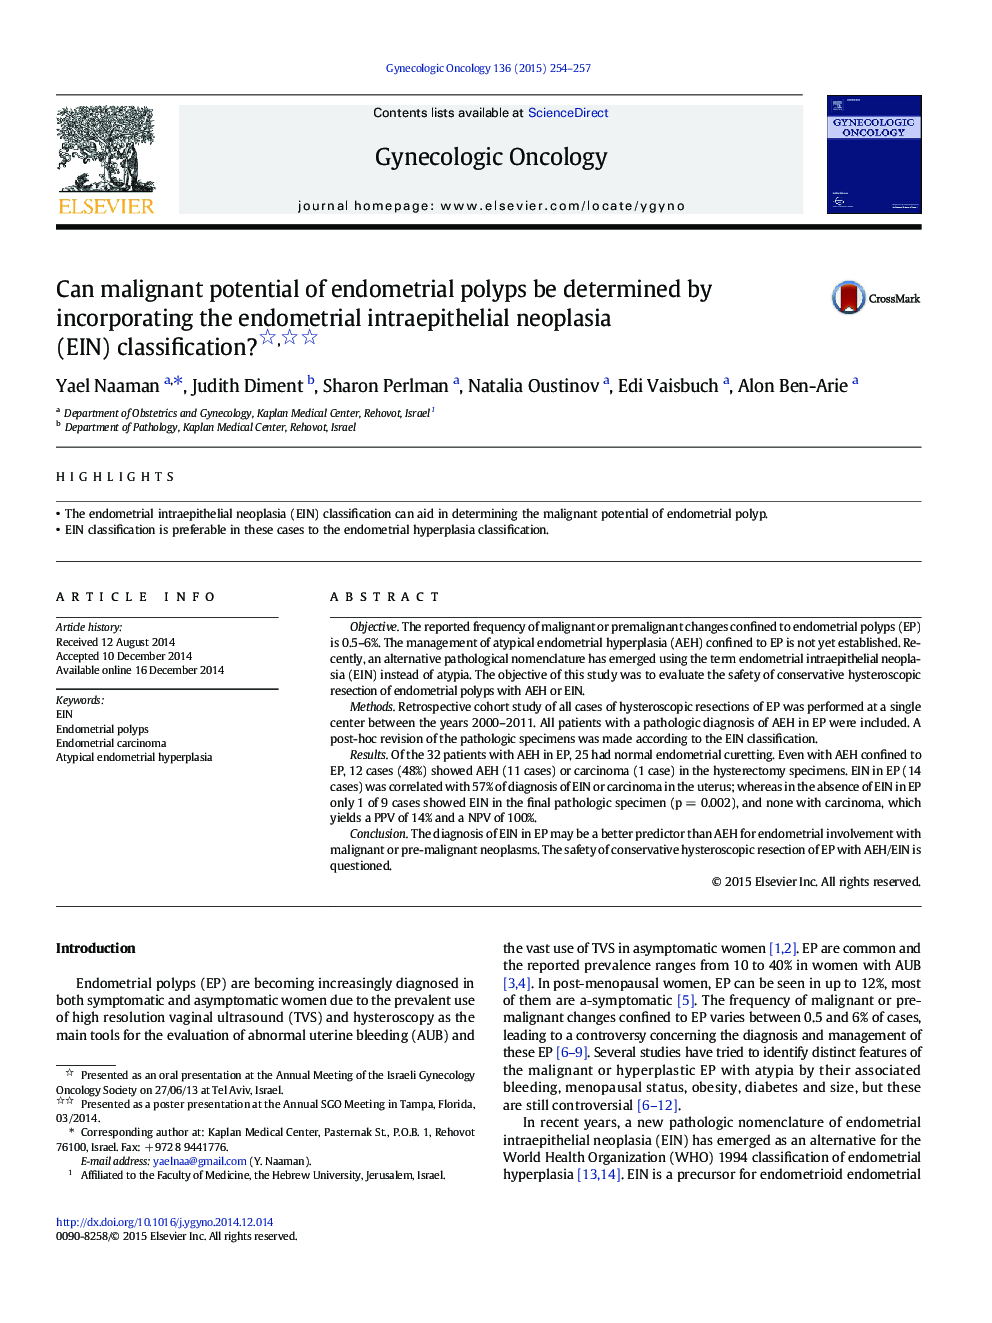 Can malignant potential of endometrial polyps be determined by incorporating the endometrial intraepithelial neoplasia (EIN) classification?